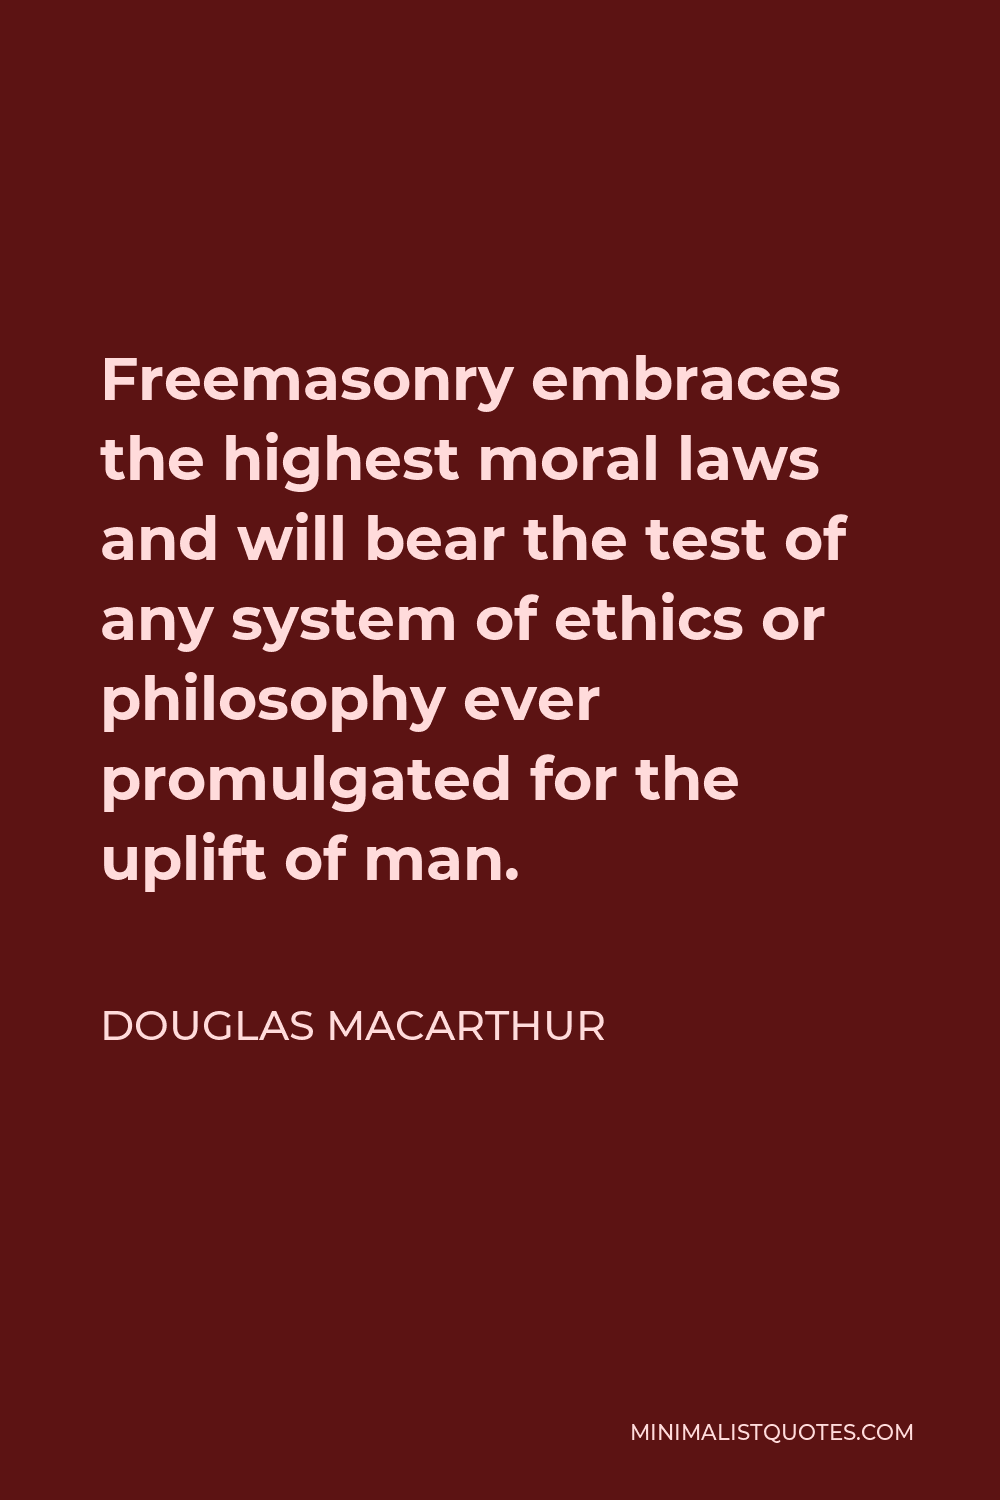 Douglas MacArthur Quote - Freemasonry embraces the highest moral laws and will bear the test of any system of ethics or philosophy ever promulgated for the uplift of man.